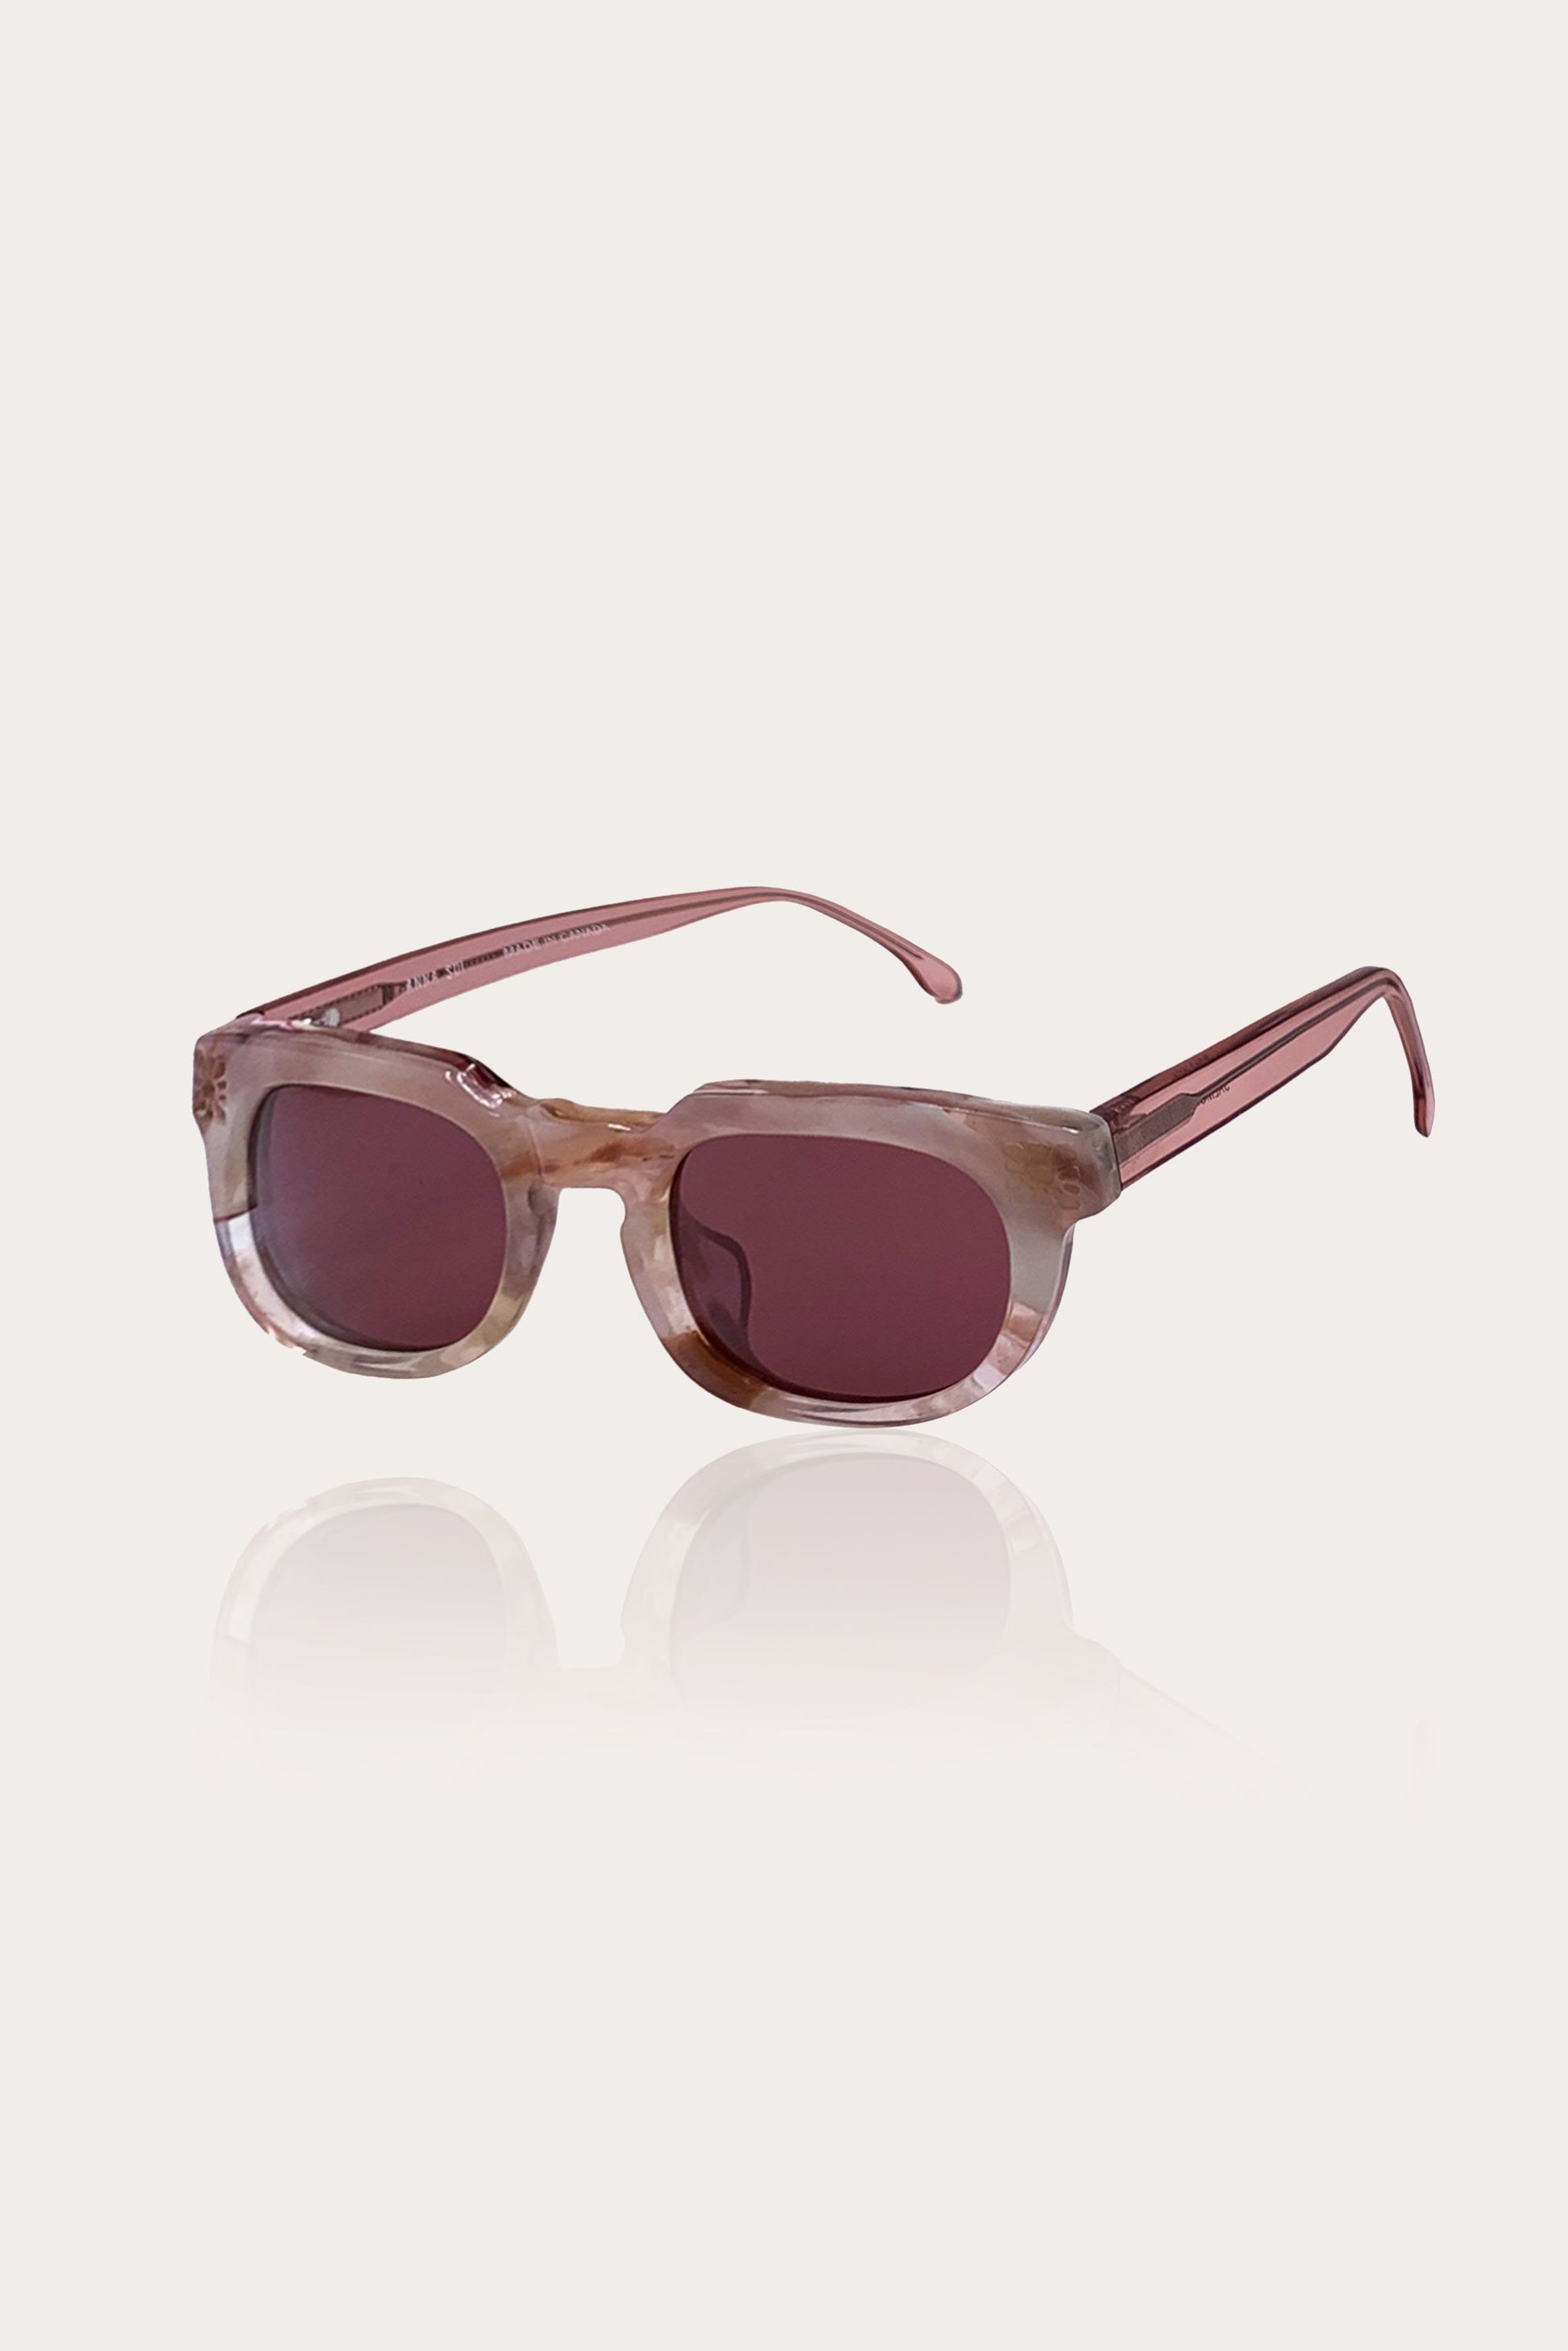 Square Sunglasses, large rose eyeglass frame with tinted lenses, made from Recycled Acetate